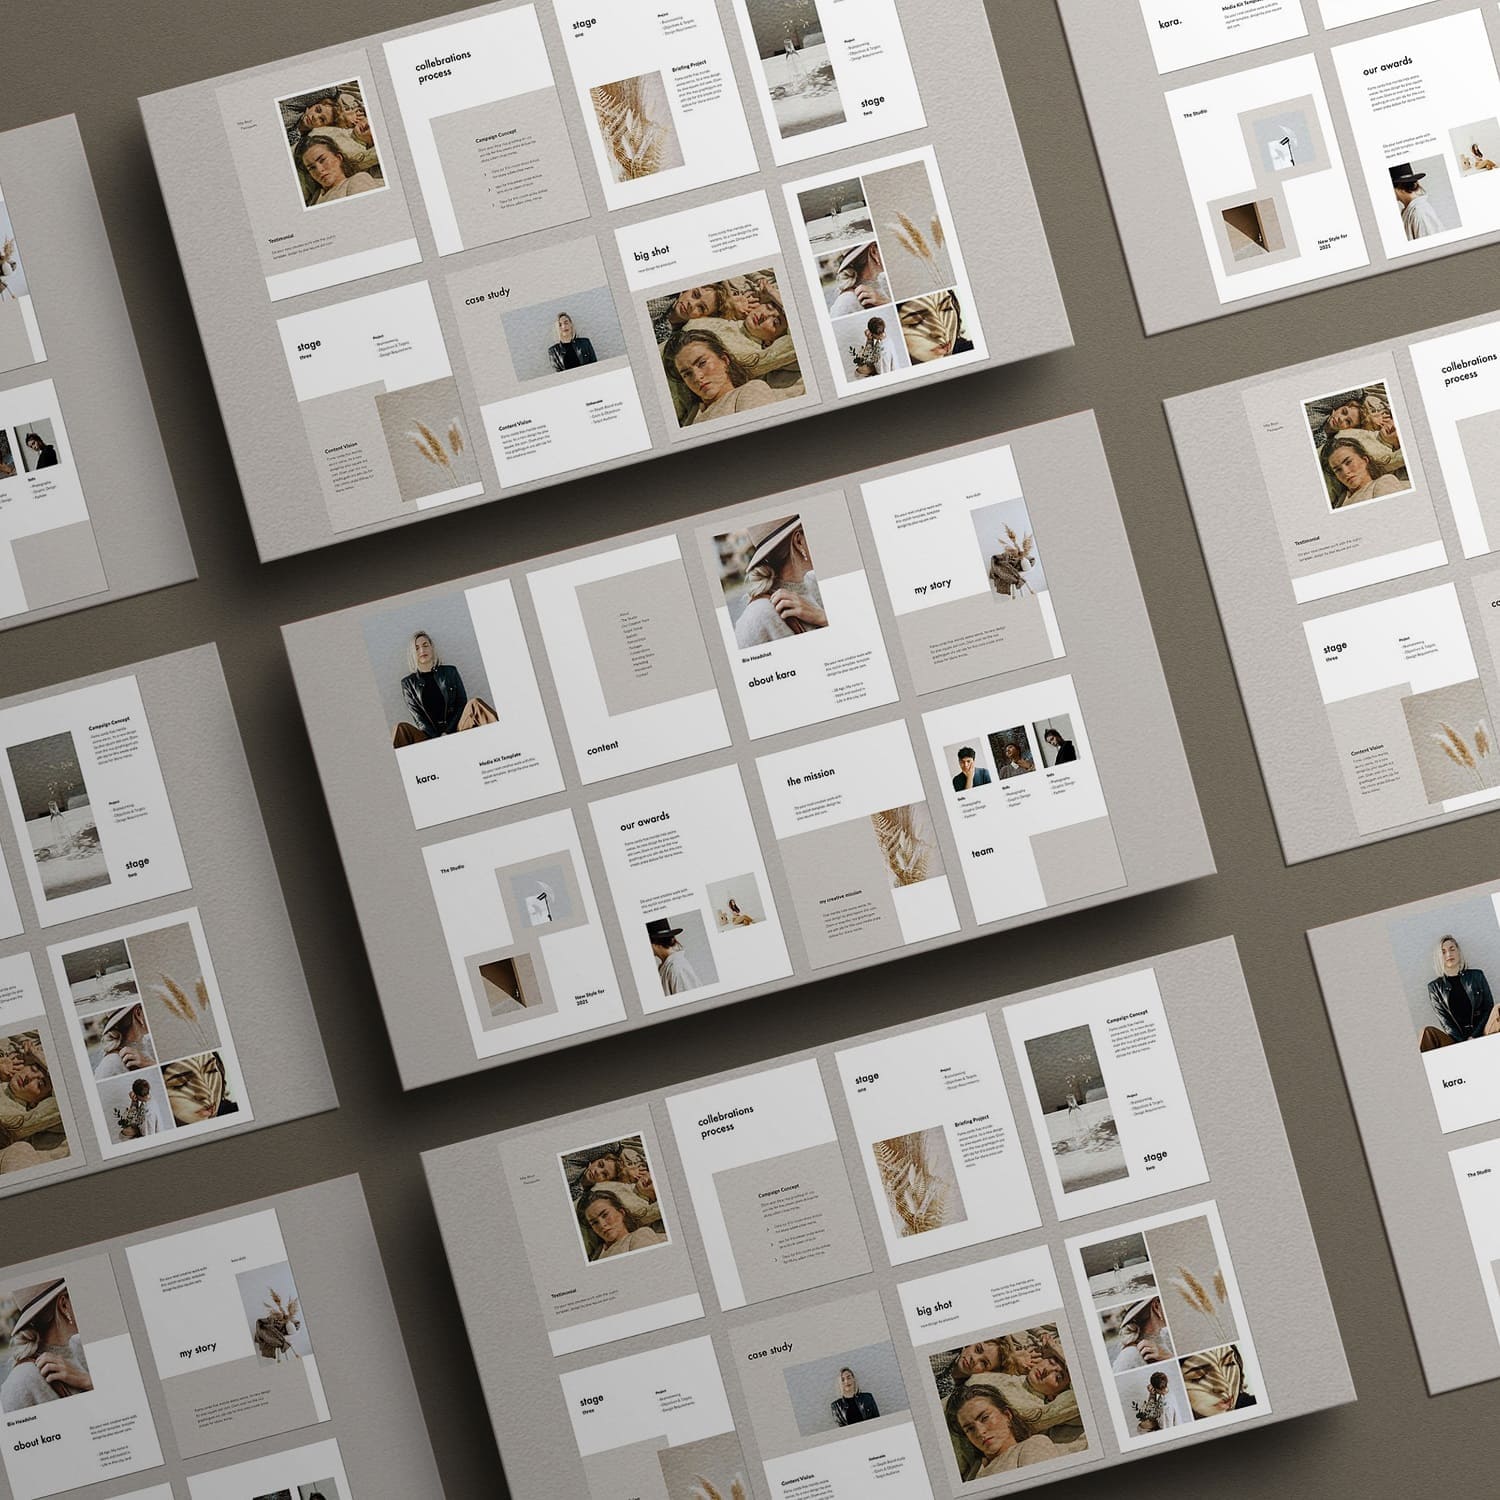 Groups of slides of 8 pieces at an angle, Kara A4 vertical keynote template.